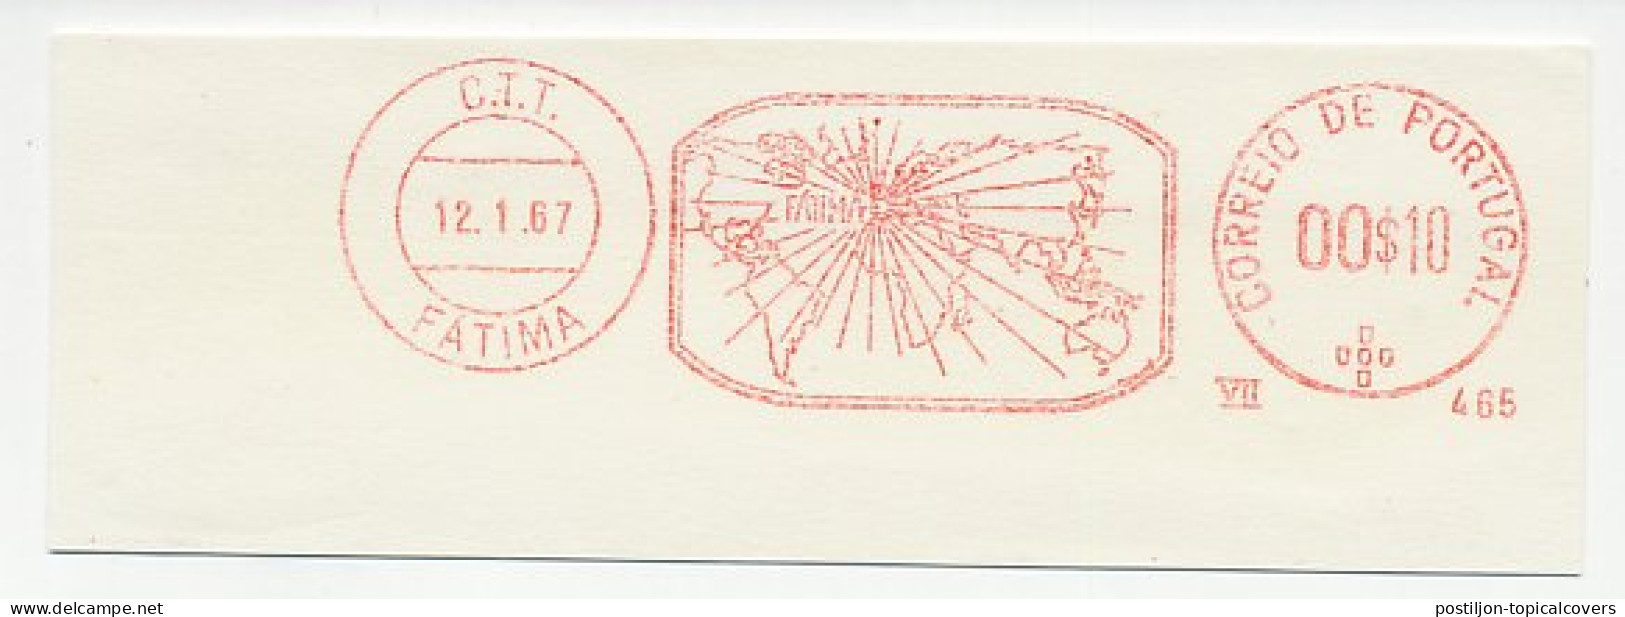 Meter Cut Portugal 1967 Map - Geography